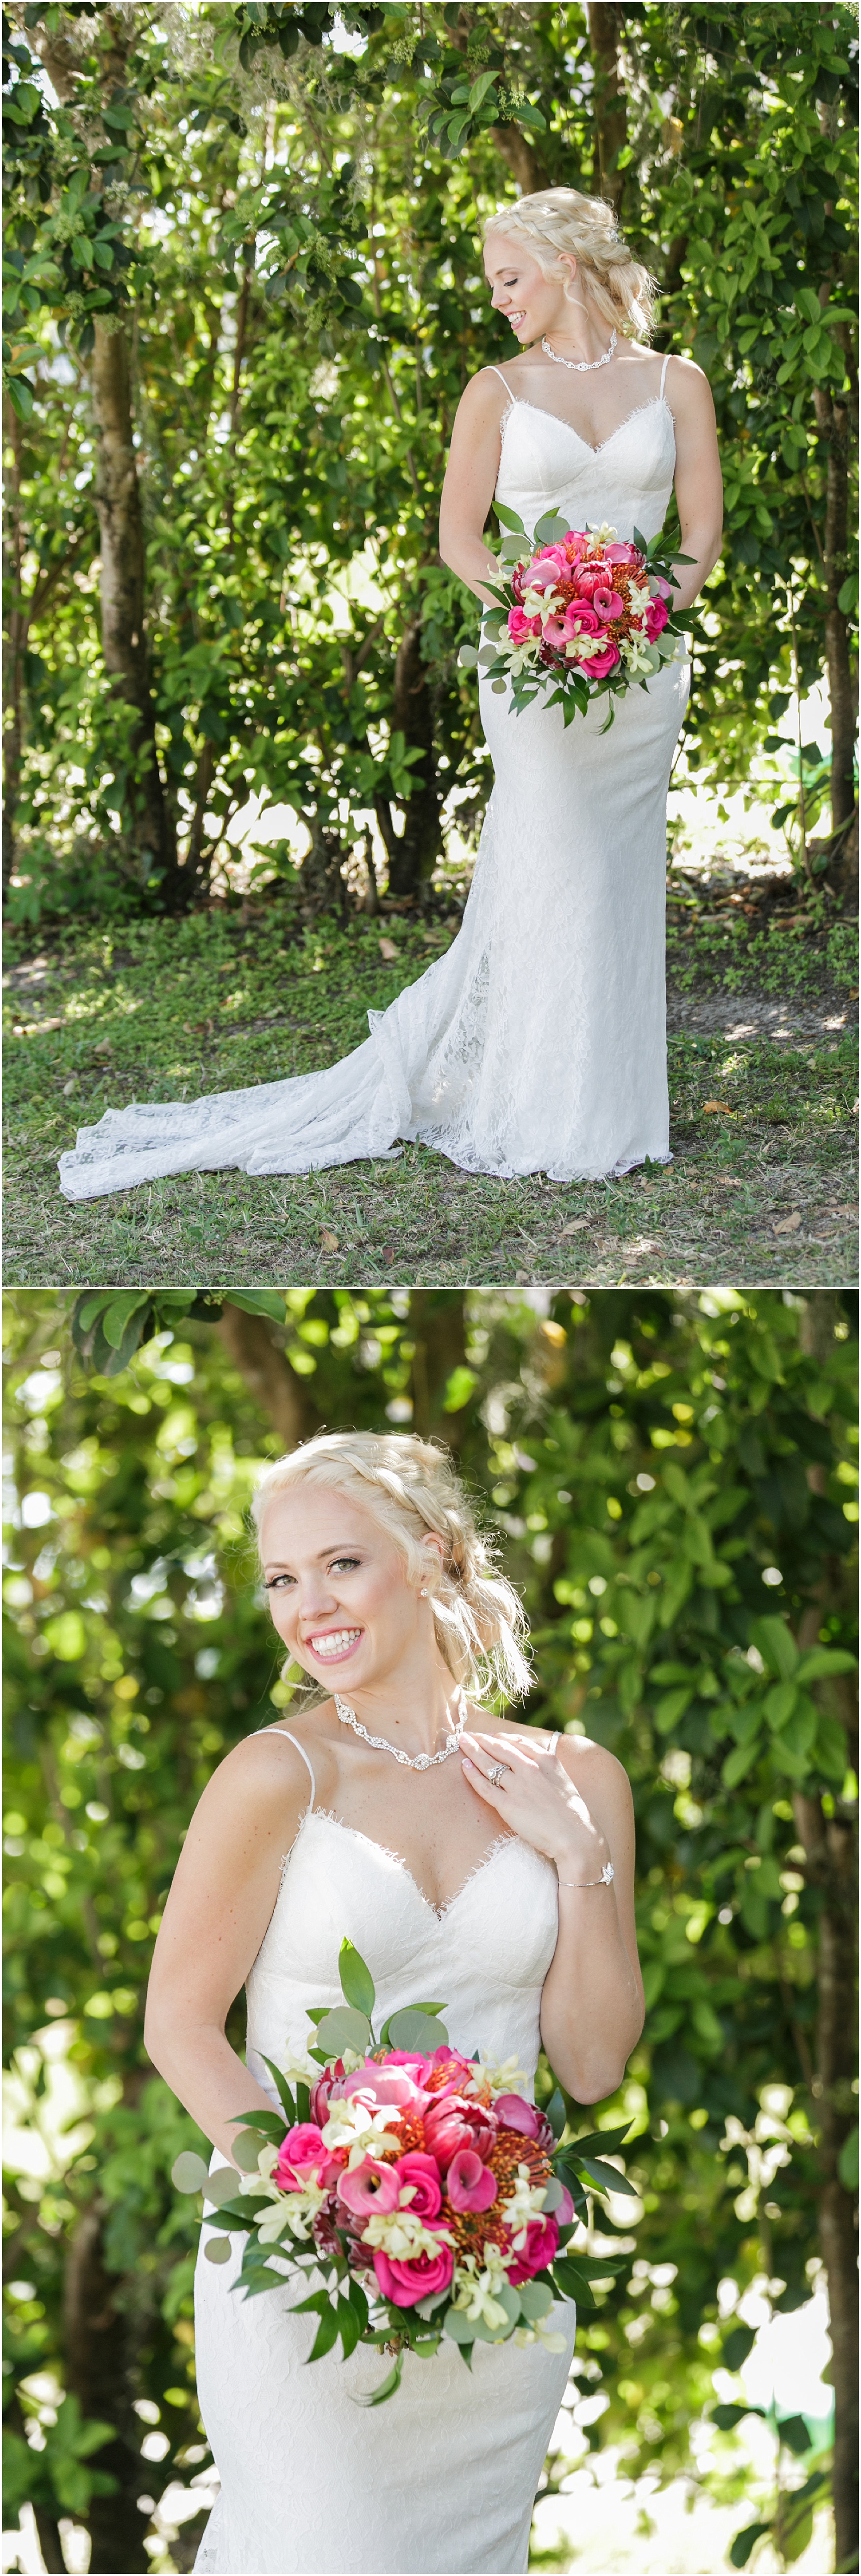 Portraits of the bride while she is standing in front of green plants.